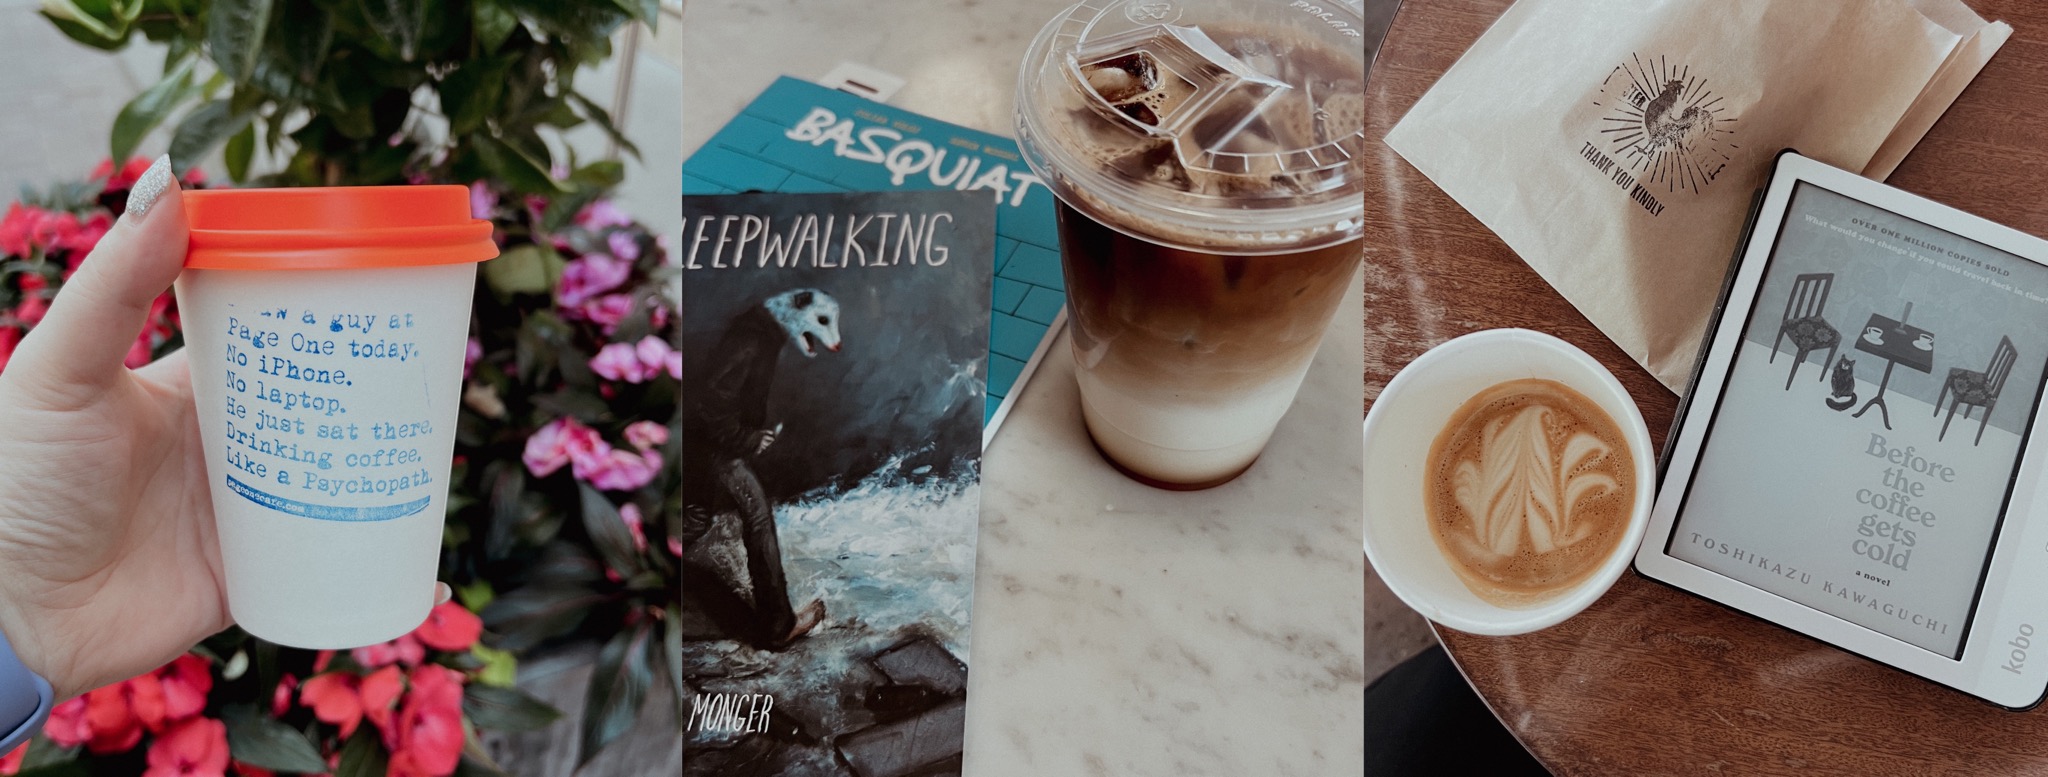 6 Downtown Toronto Coffee Shops We Love to Read and Write In